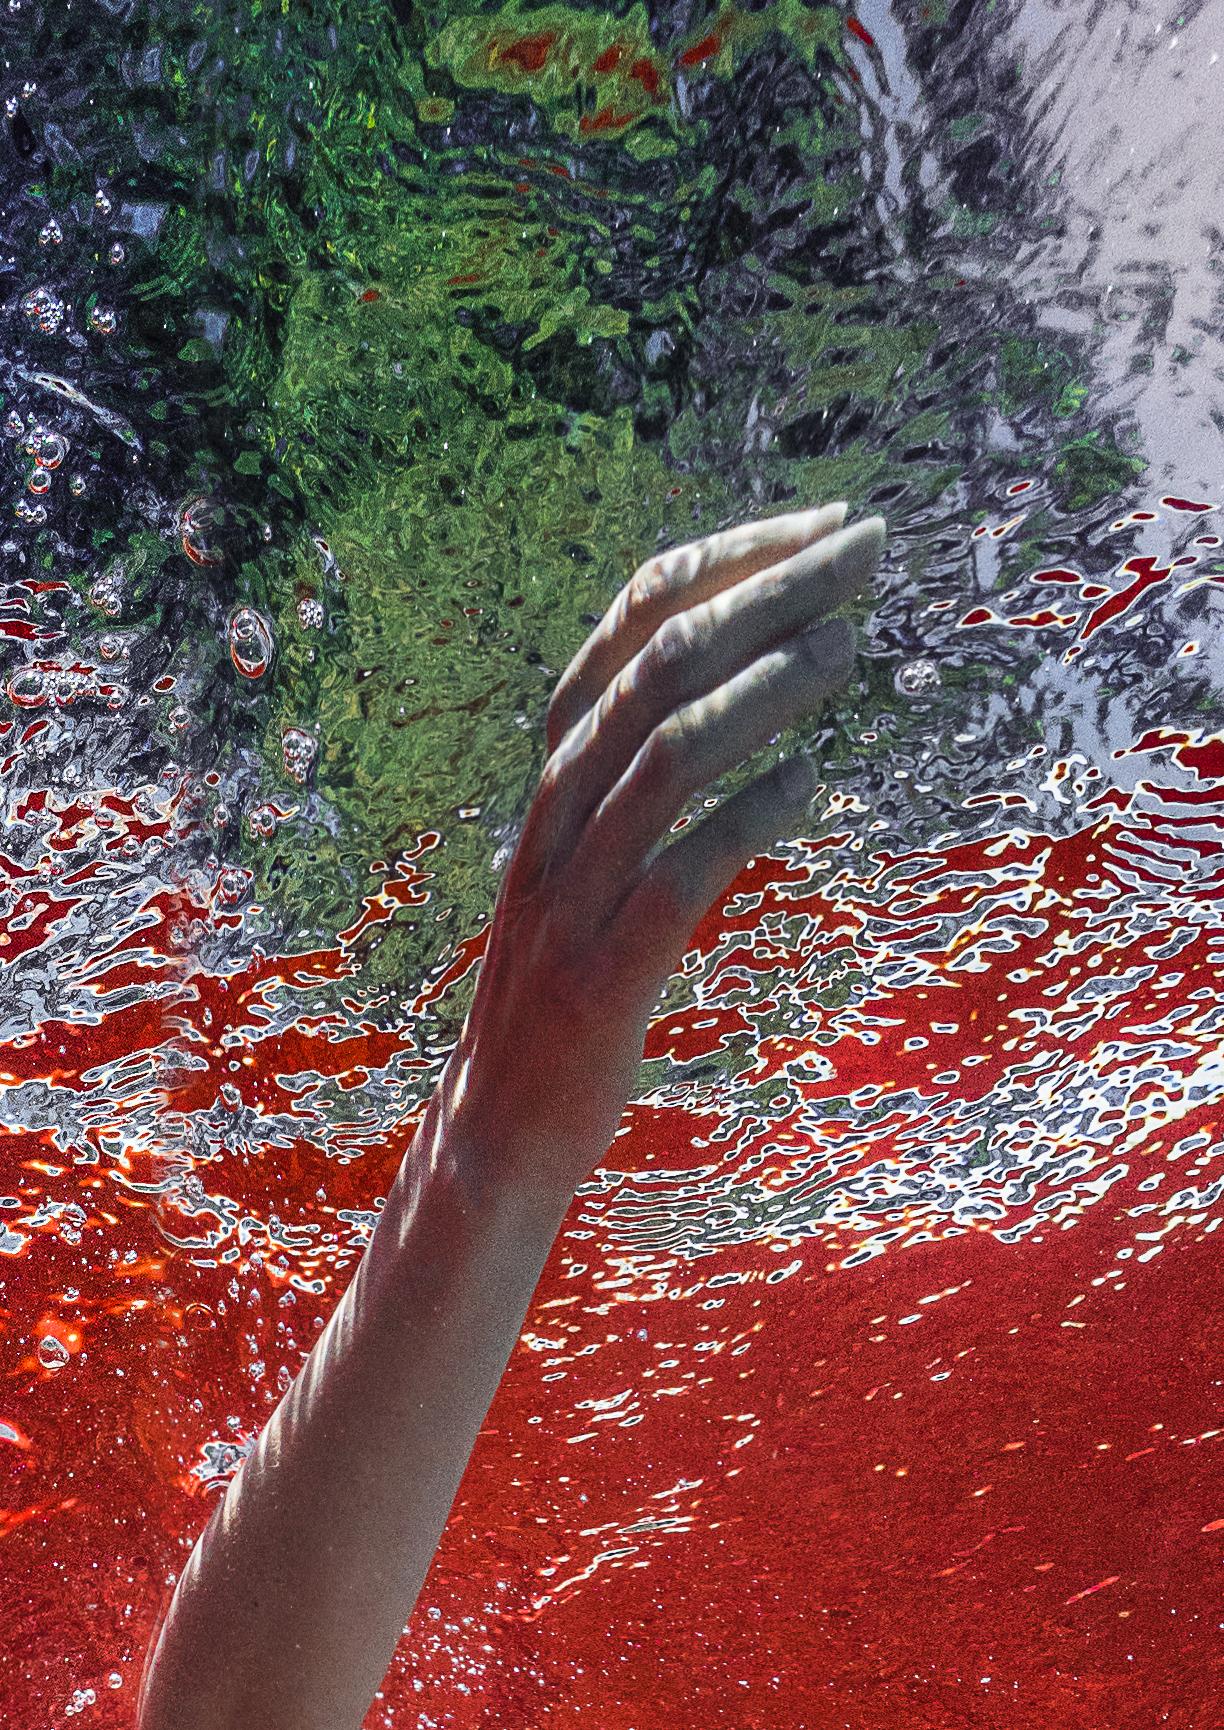 An underwater photograph of a naked young woman diving in a pool in front of bright red background.

There is no rules for luck.  I was sure the new girl would need practice and practice - and I was wrong. She was just perfect from the first second.